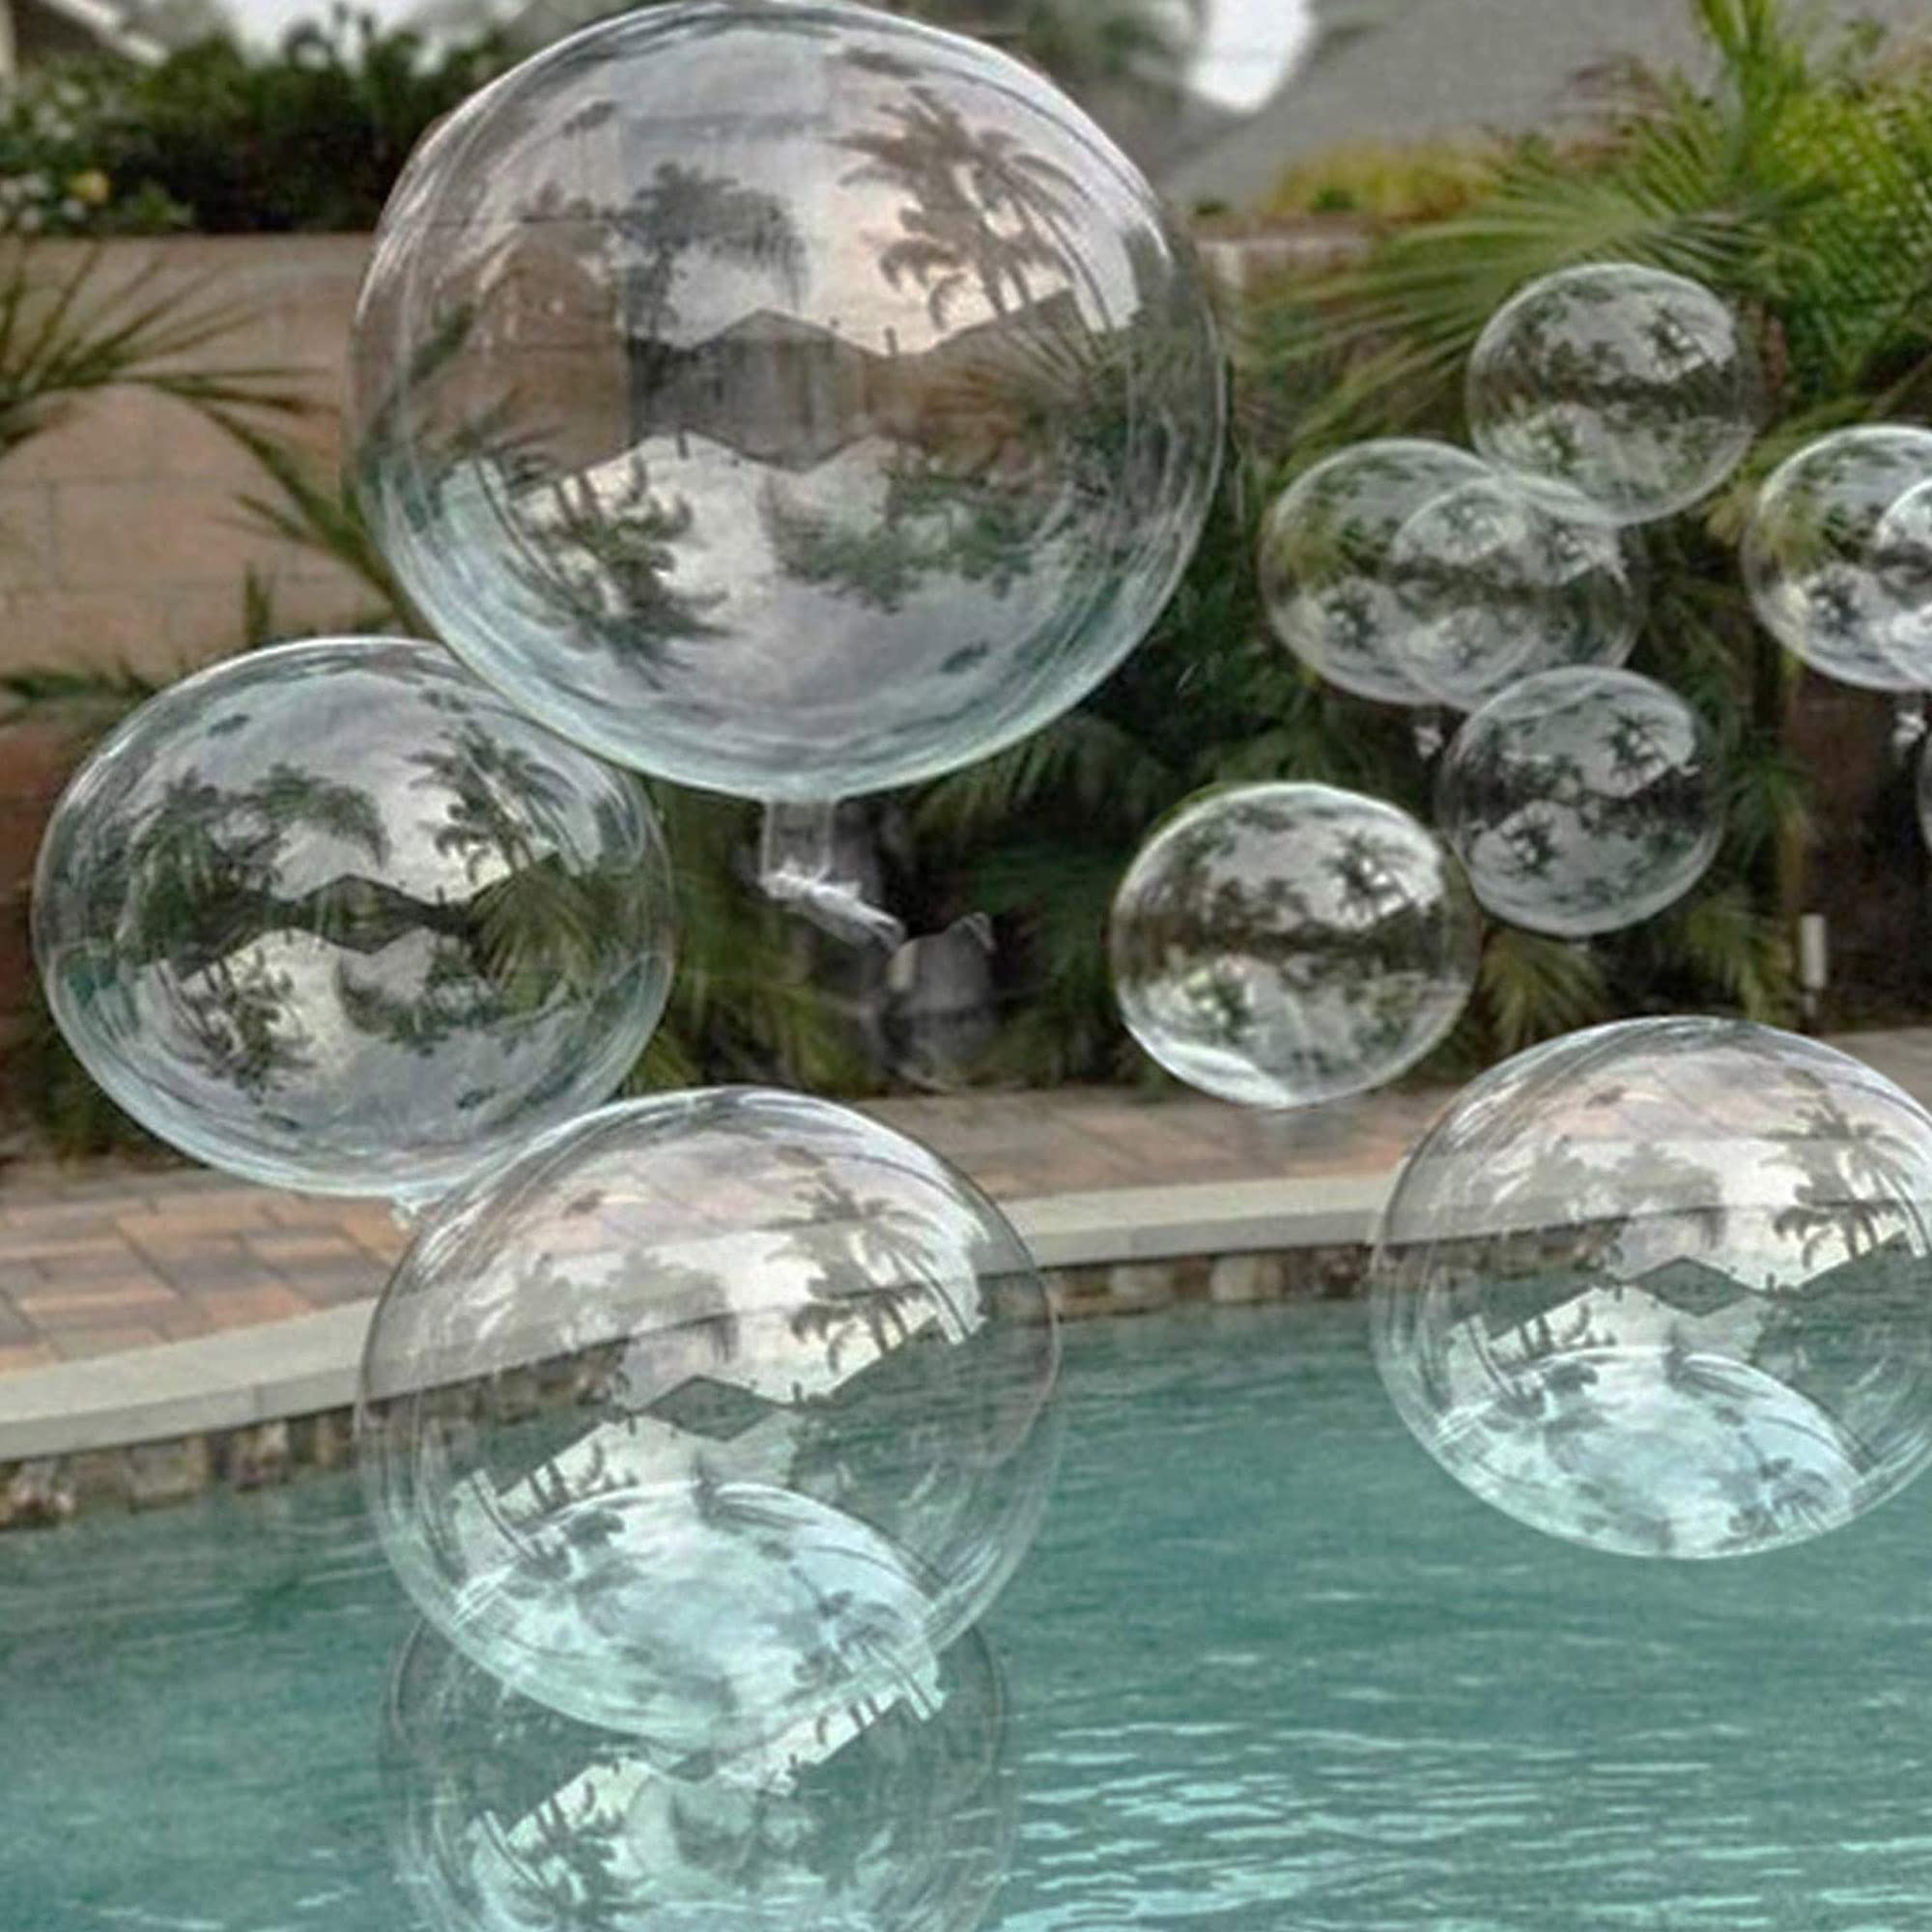 A dream bubble with letters floating inside.